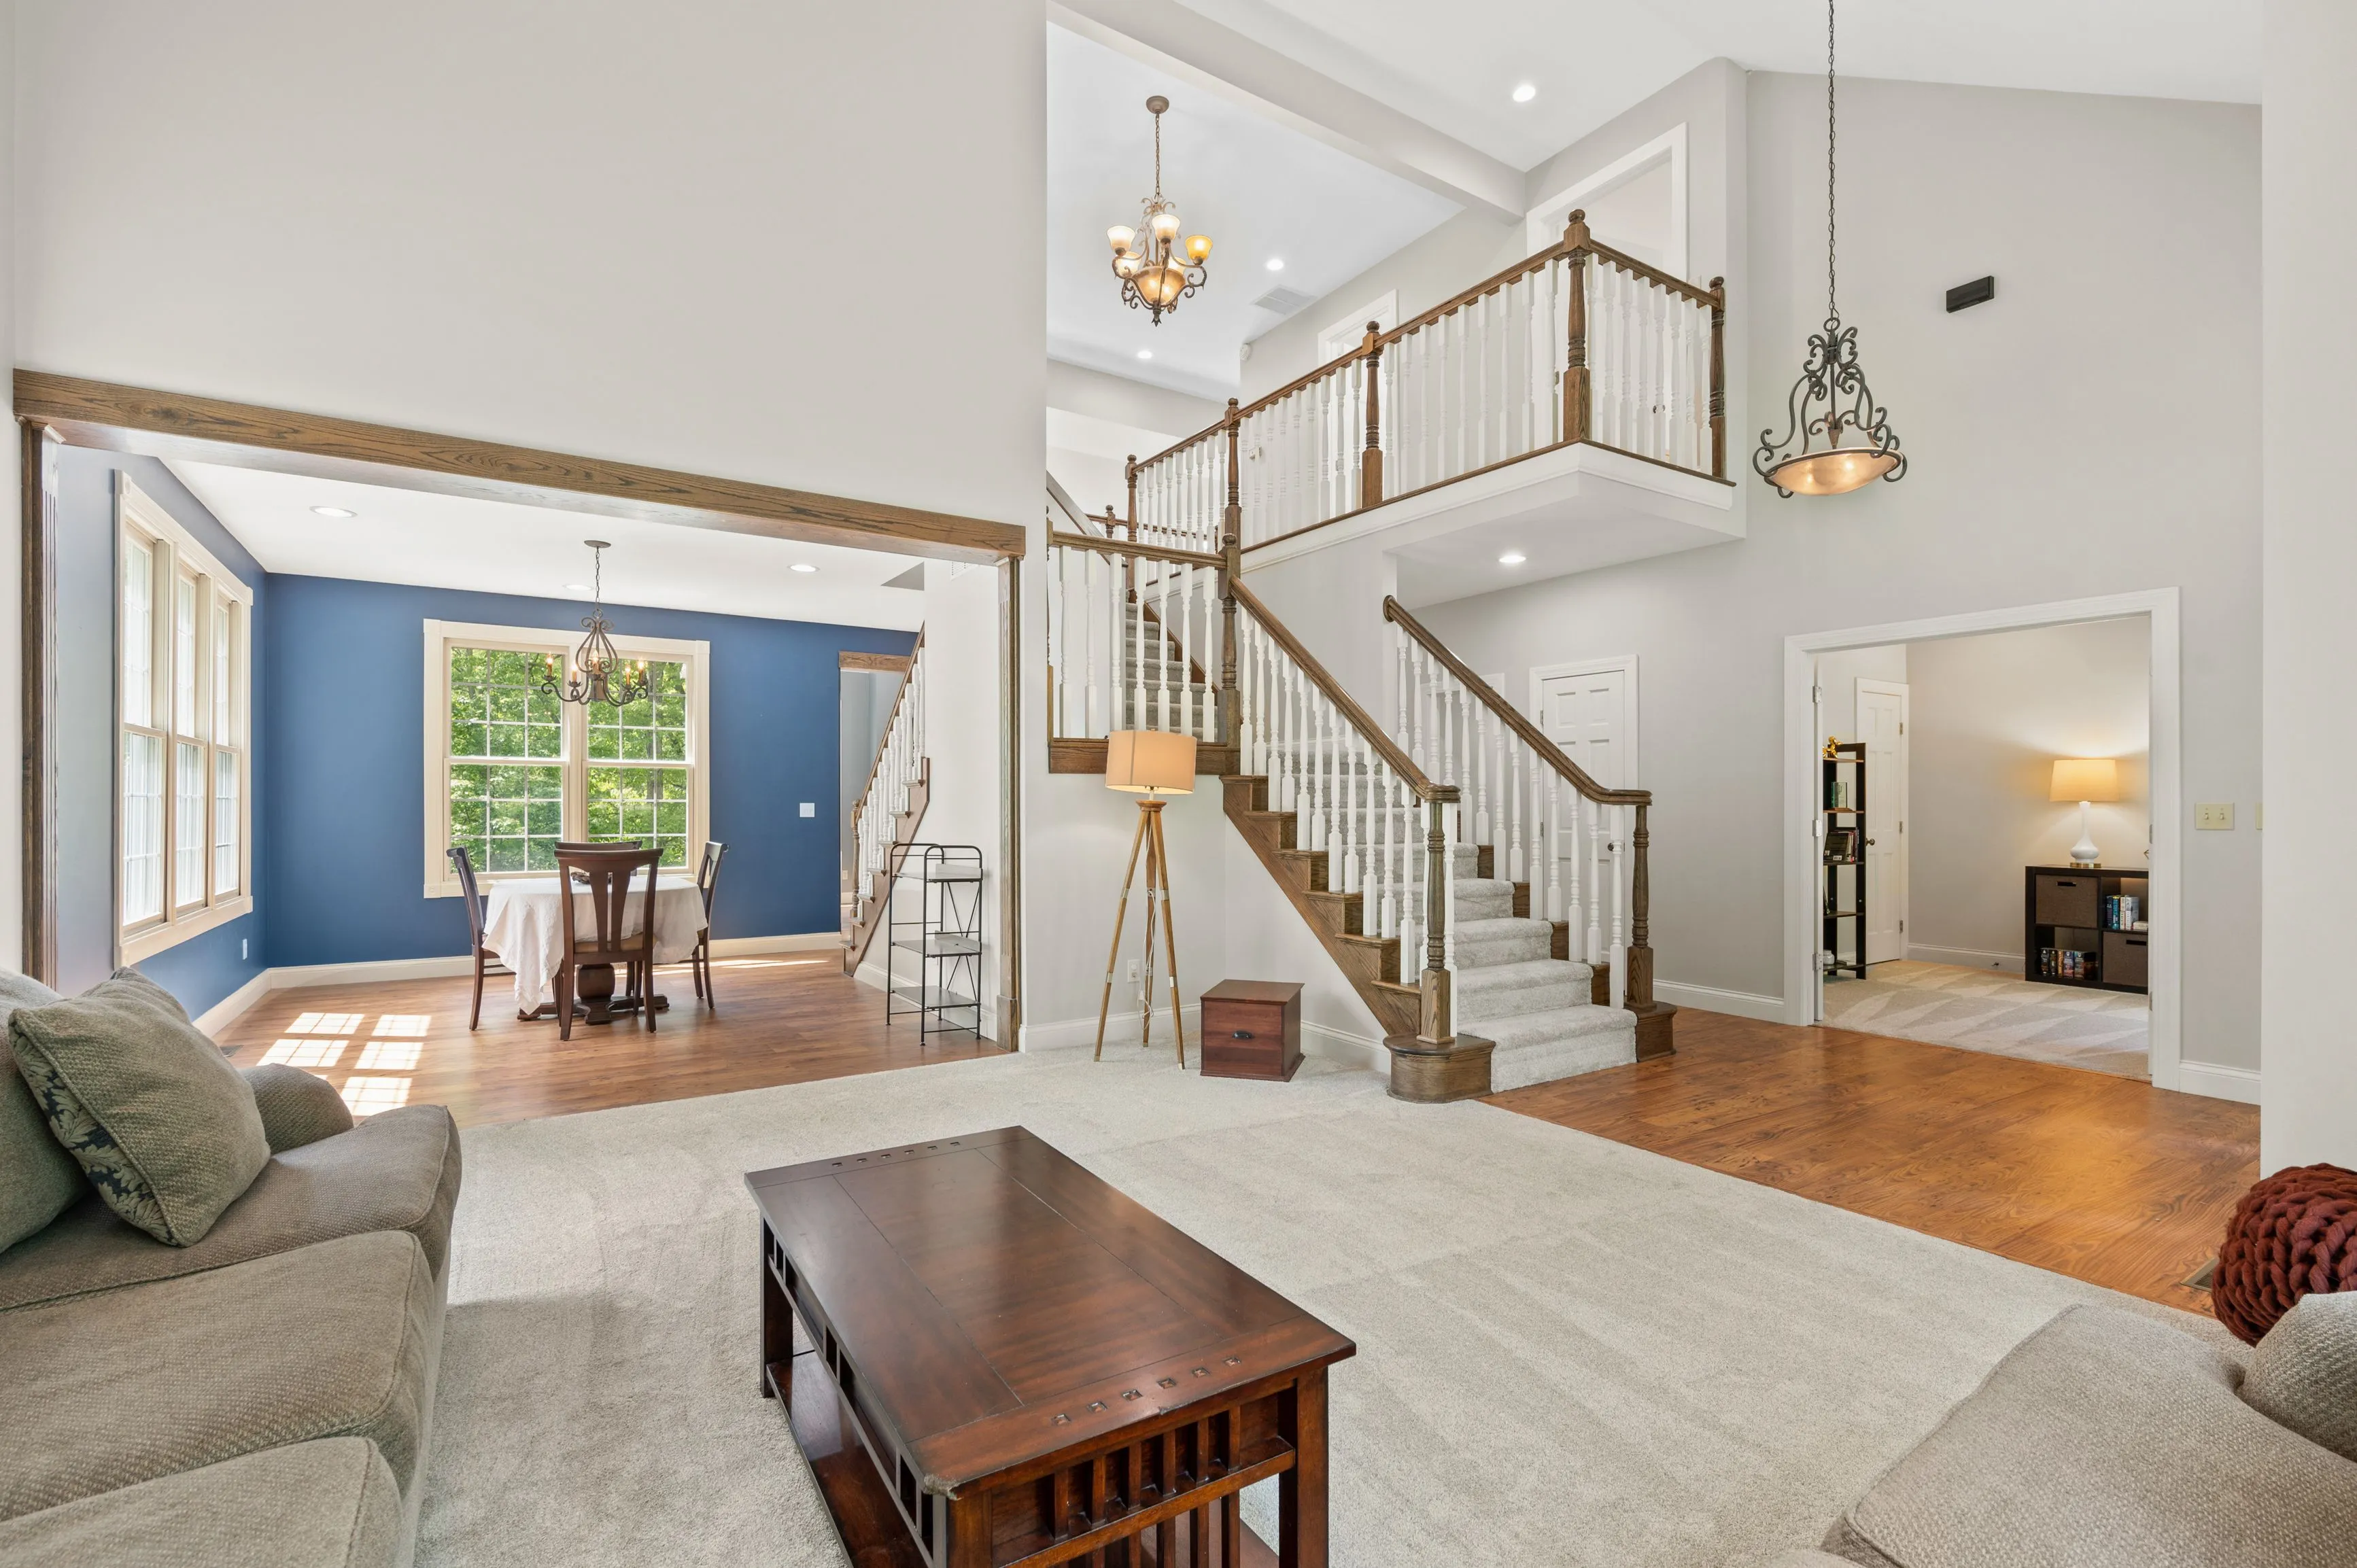 Spacious living room leading to an open dining area with a staircase to the second level, featuring hardwood floors and high ceilings.